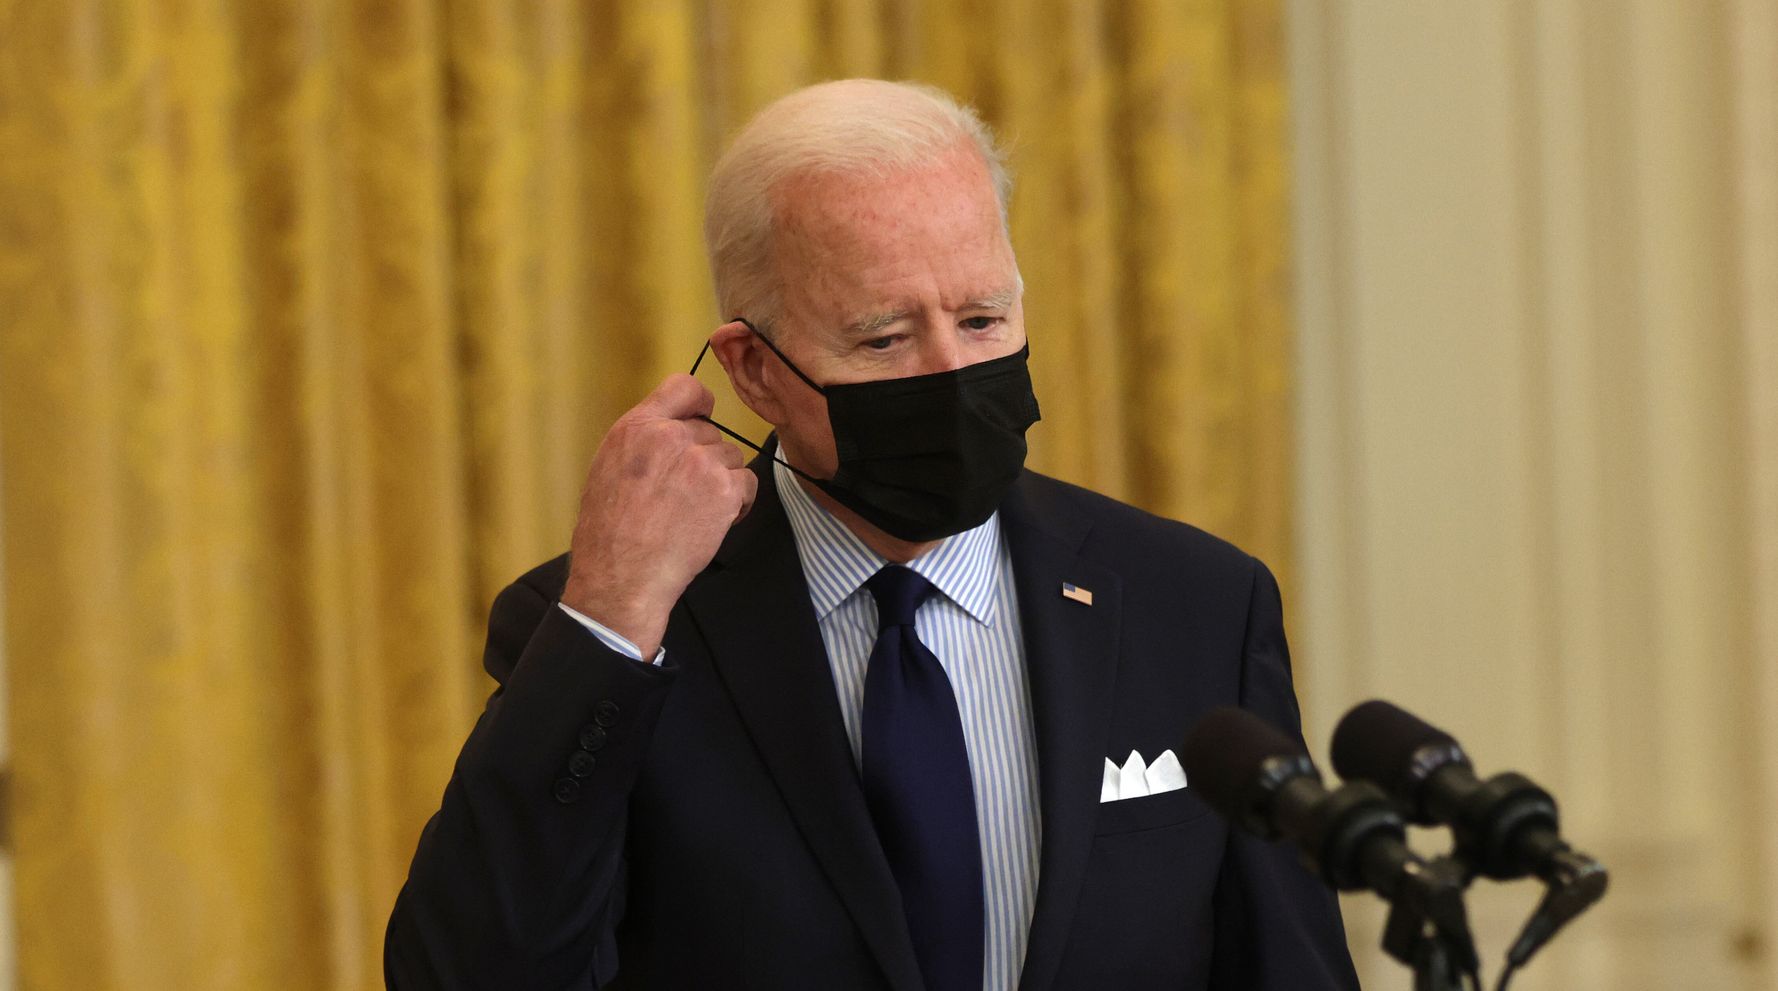 Biden To Require All Federal Employees To Get Vaccinated Or Face Weekly Testing